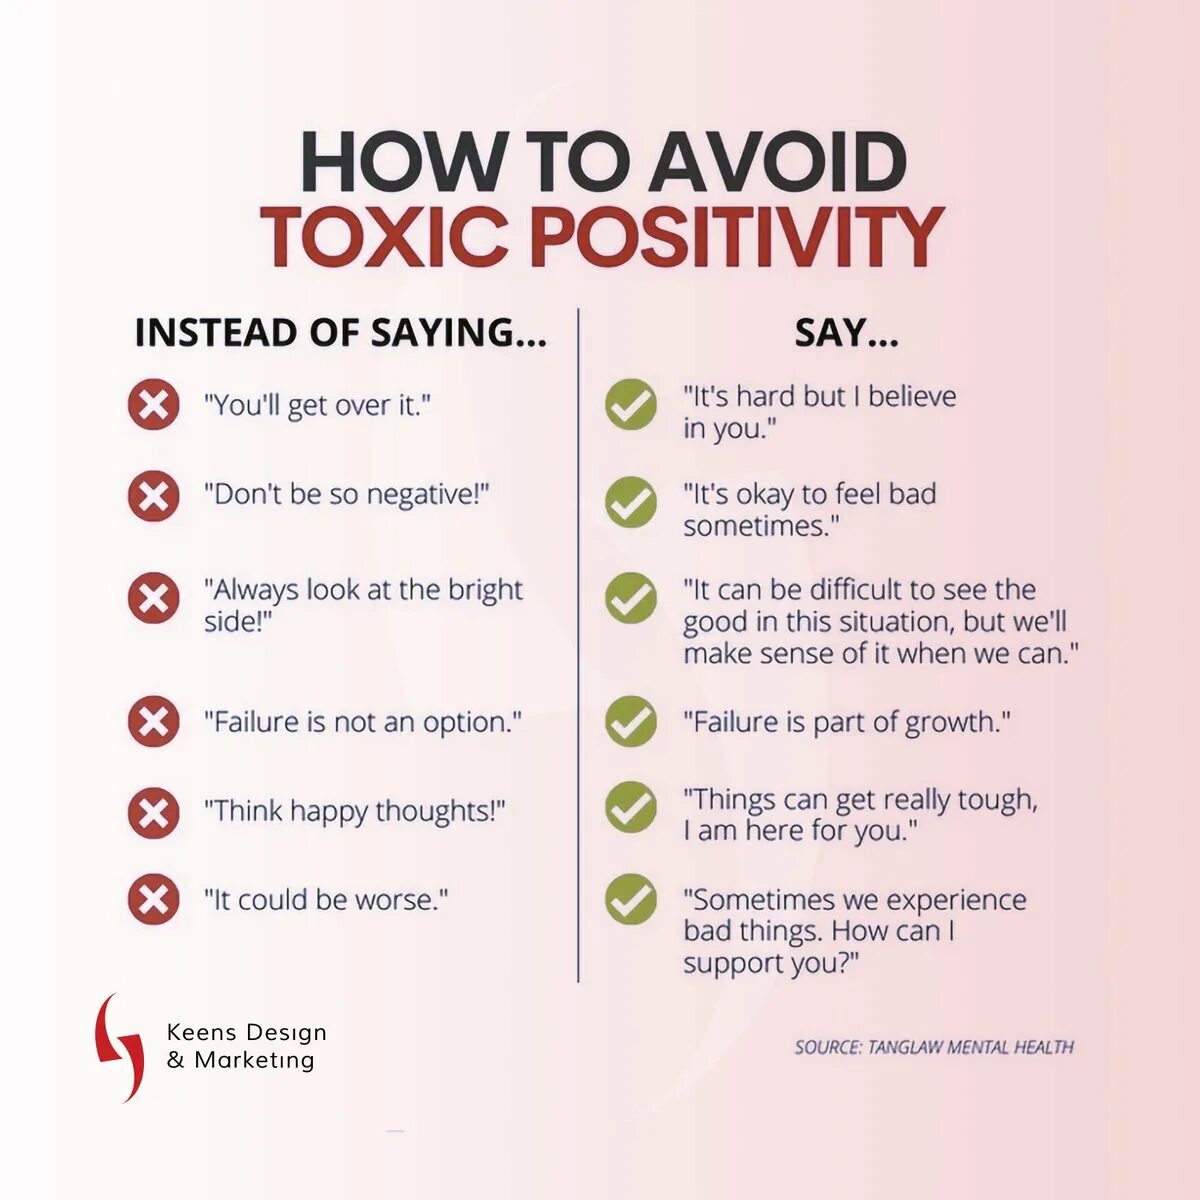 Не играй со мной текст токсис. Toxic positivity. How to deal with Toxic people. Toxic positivity book. Rulez — Toxic positivity.